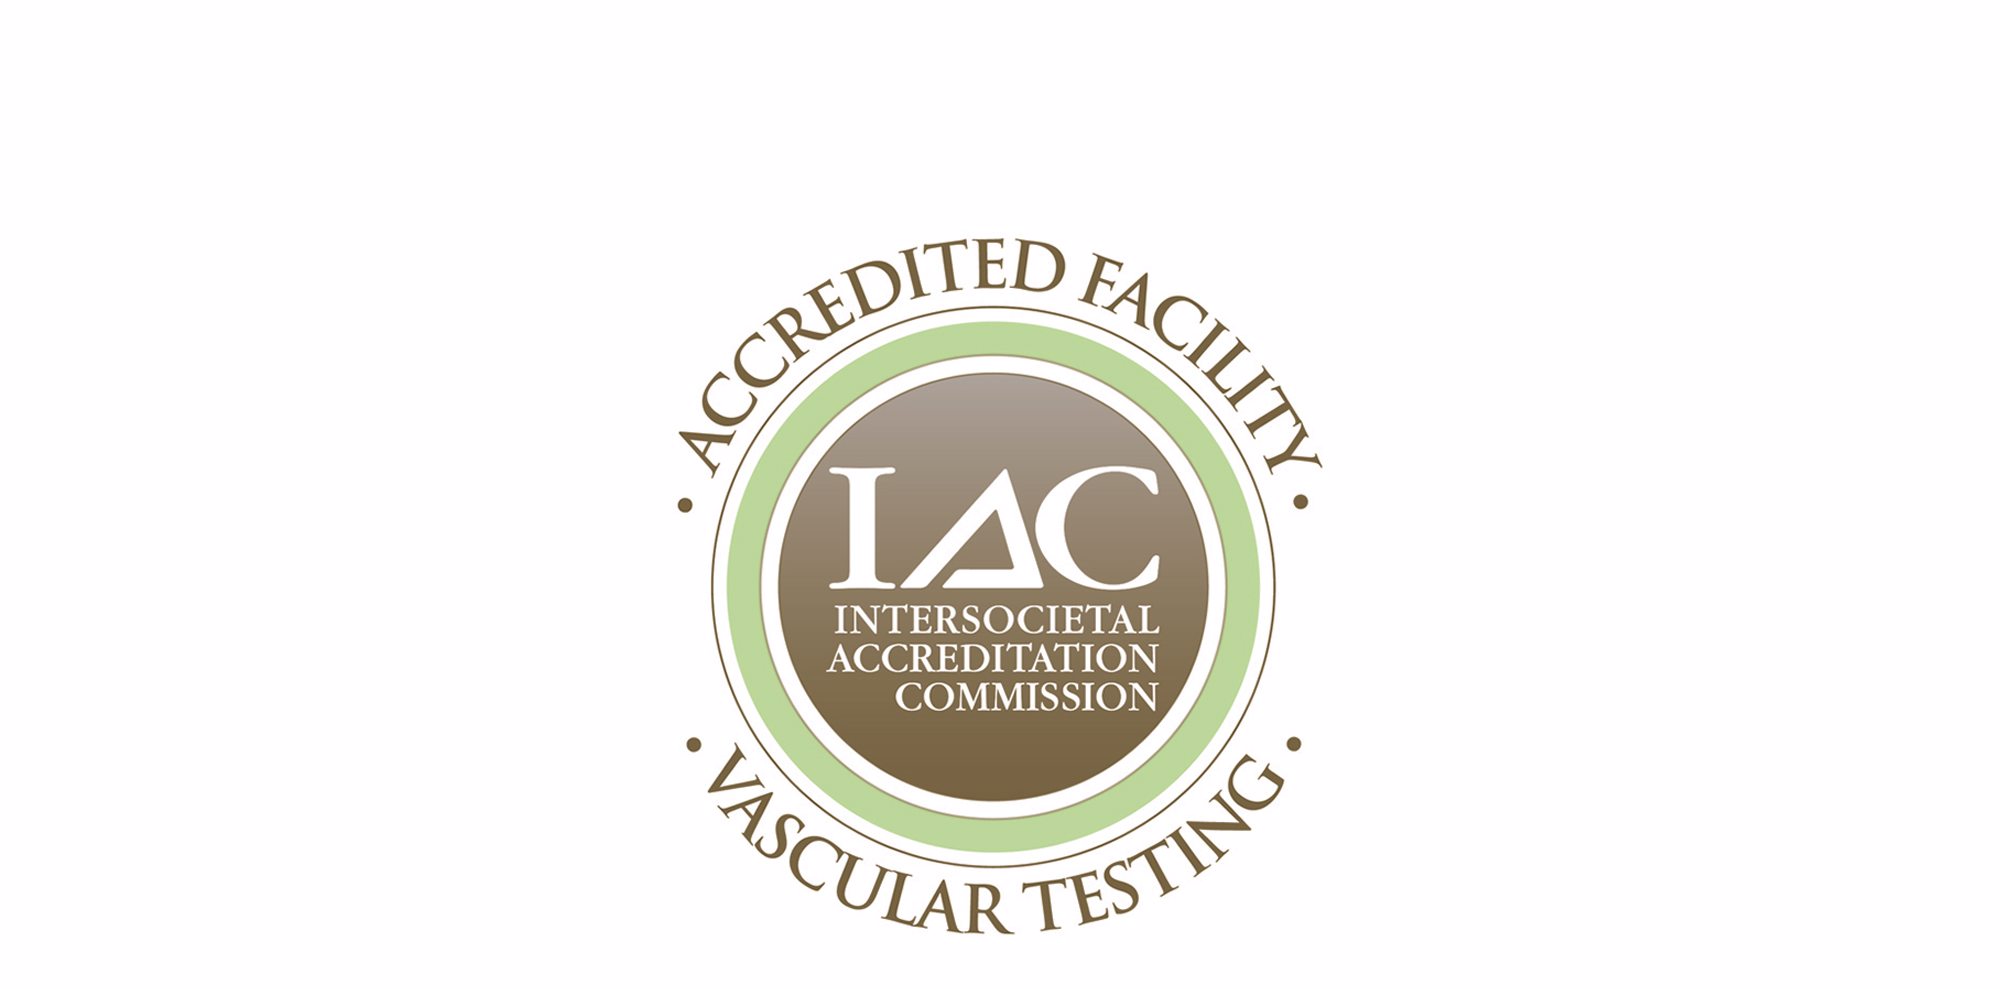 Evangelical Community Hospital Imaging Centers Earn Vascular Testing Reaccreditation from the IAC